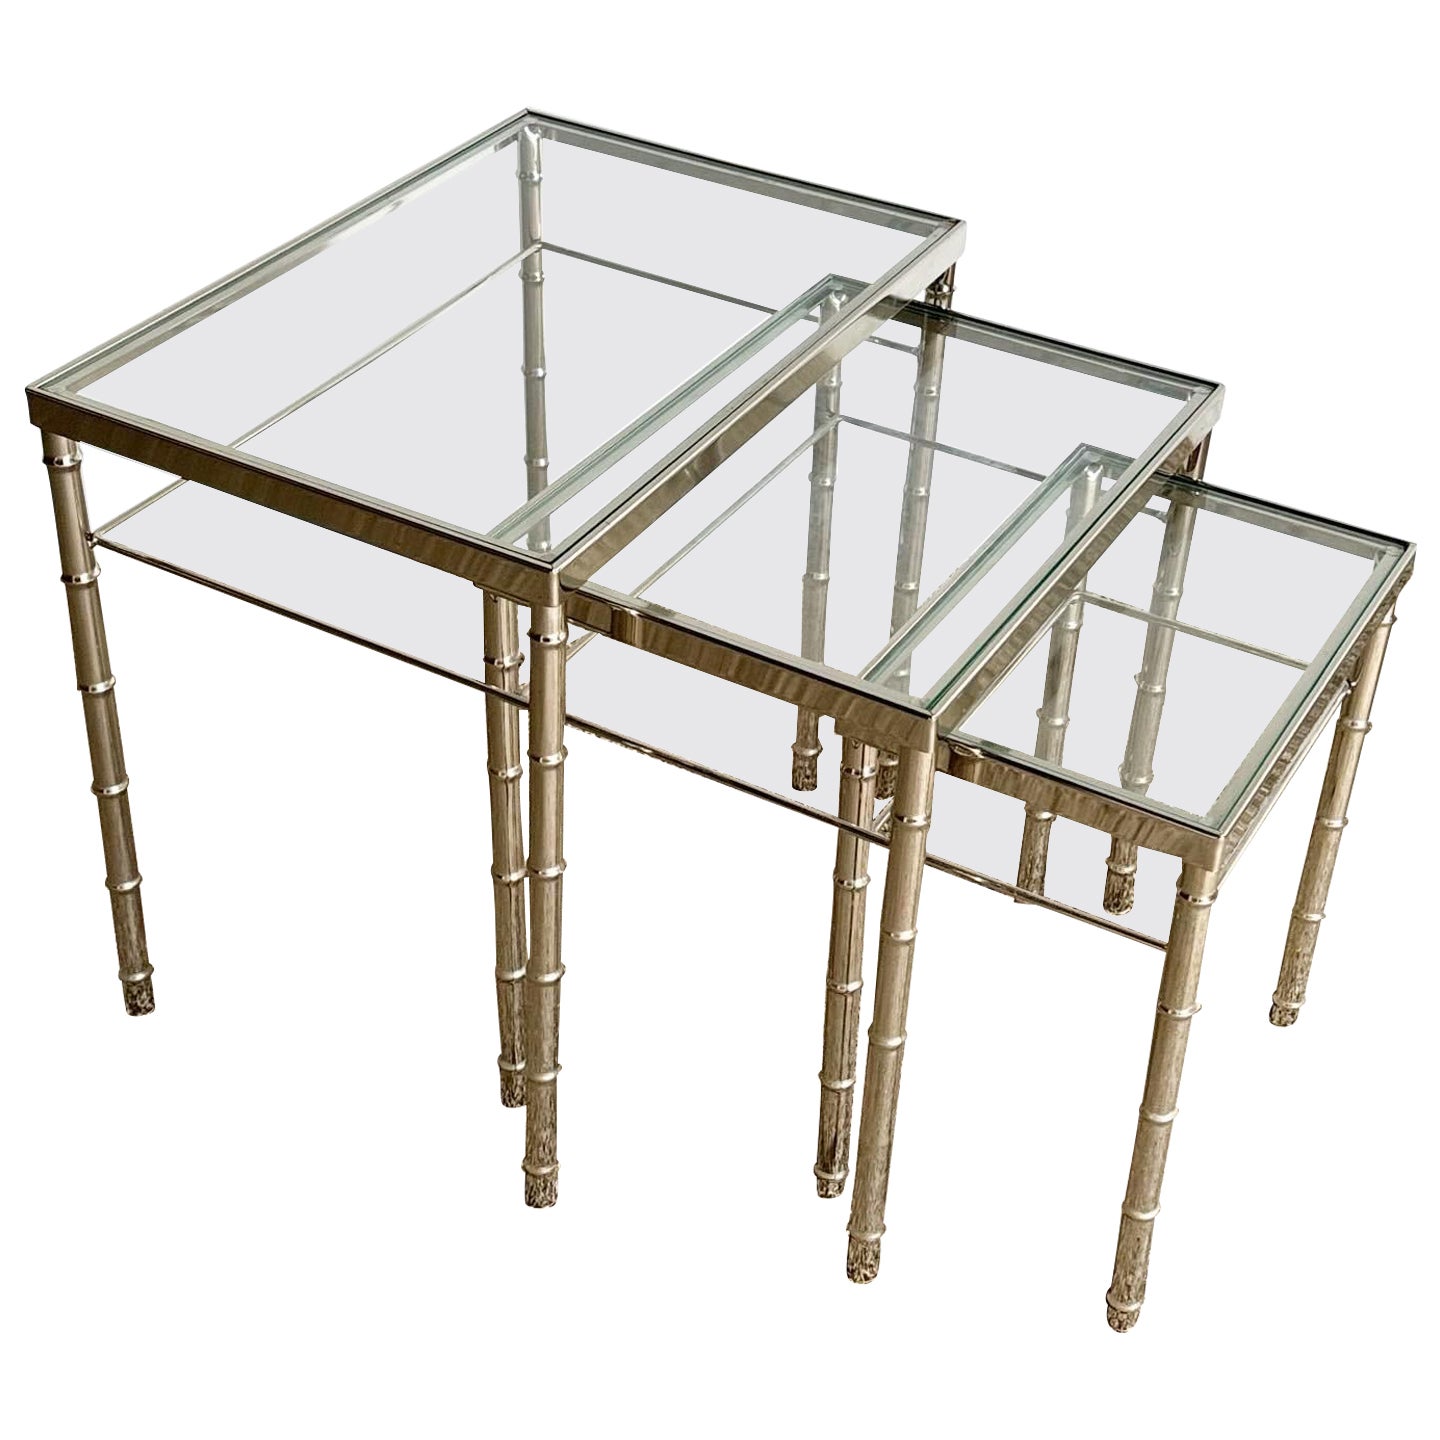 Mid Century Modern Chrome Faux Bamboo Glass Top Nesting Tables - Set of 3